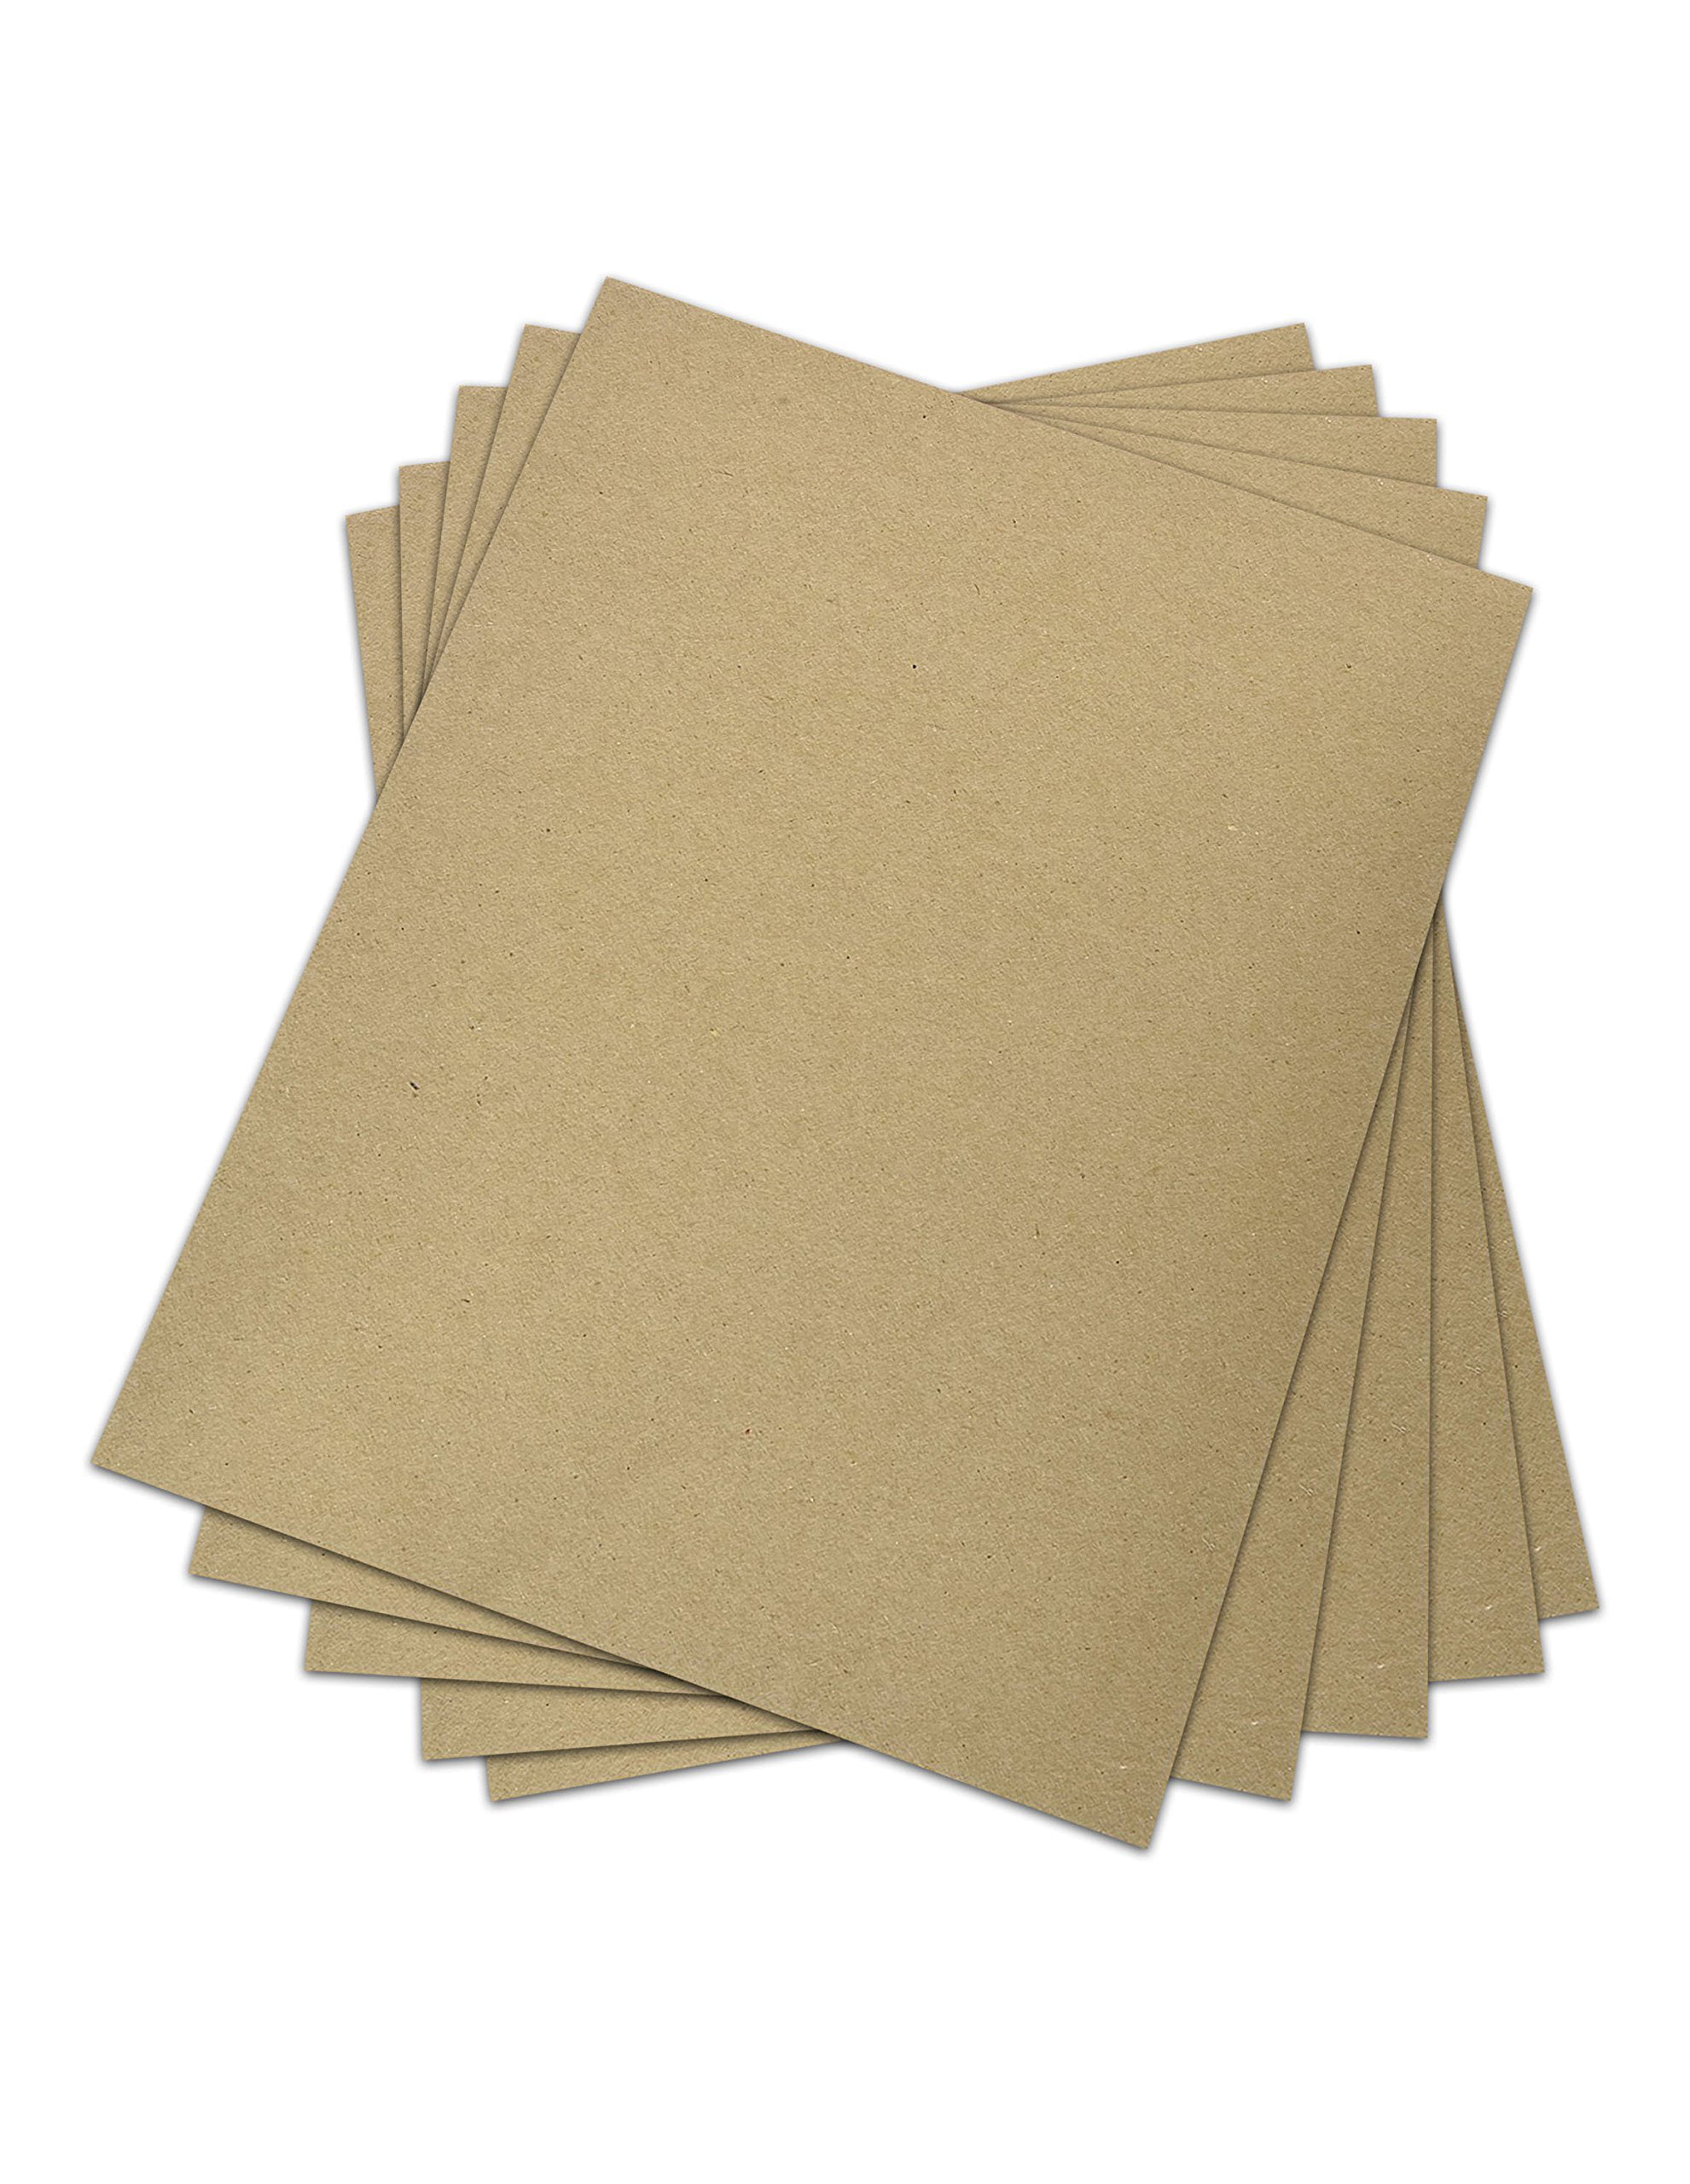 8.5 X 11 Inch kraft Chipboard Set of 25 Scrapbook Chipboard Sheets,  Chipboard Letters, Party Banner Supplies, Rustic Wedding 